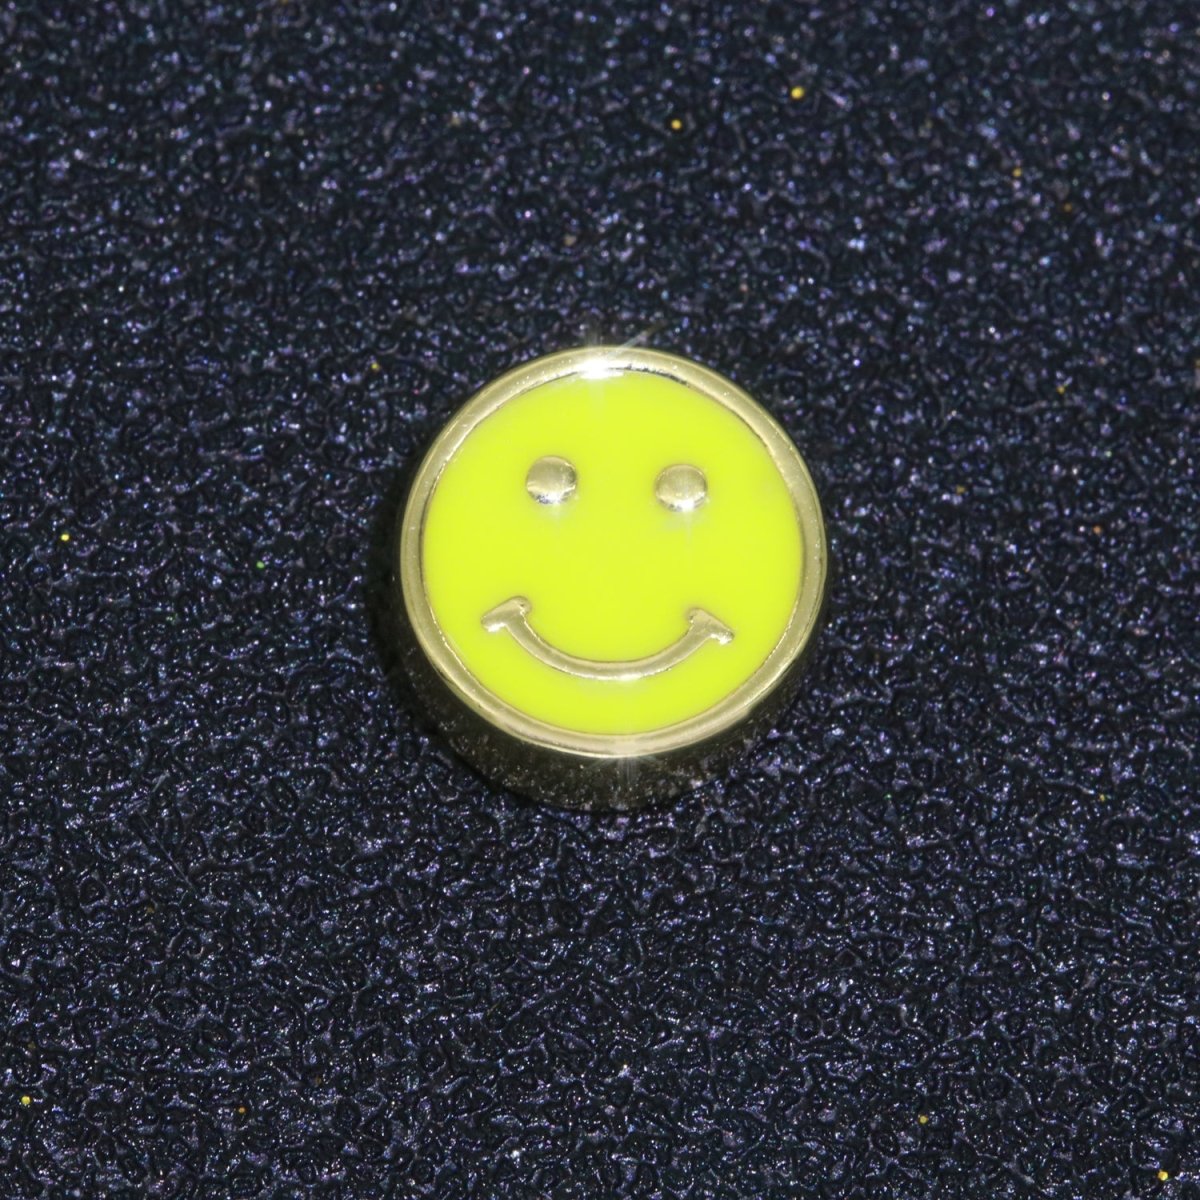 10mm Enamel Heart Smiley Face Bead, Emoji Bead, Happy Face, Gold Cute Spacer Bead, Necklace And Bracelet Making, Jewelry Supply B-604 B-606 B-607 B-609 B-610 - DLUXCA